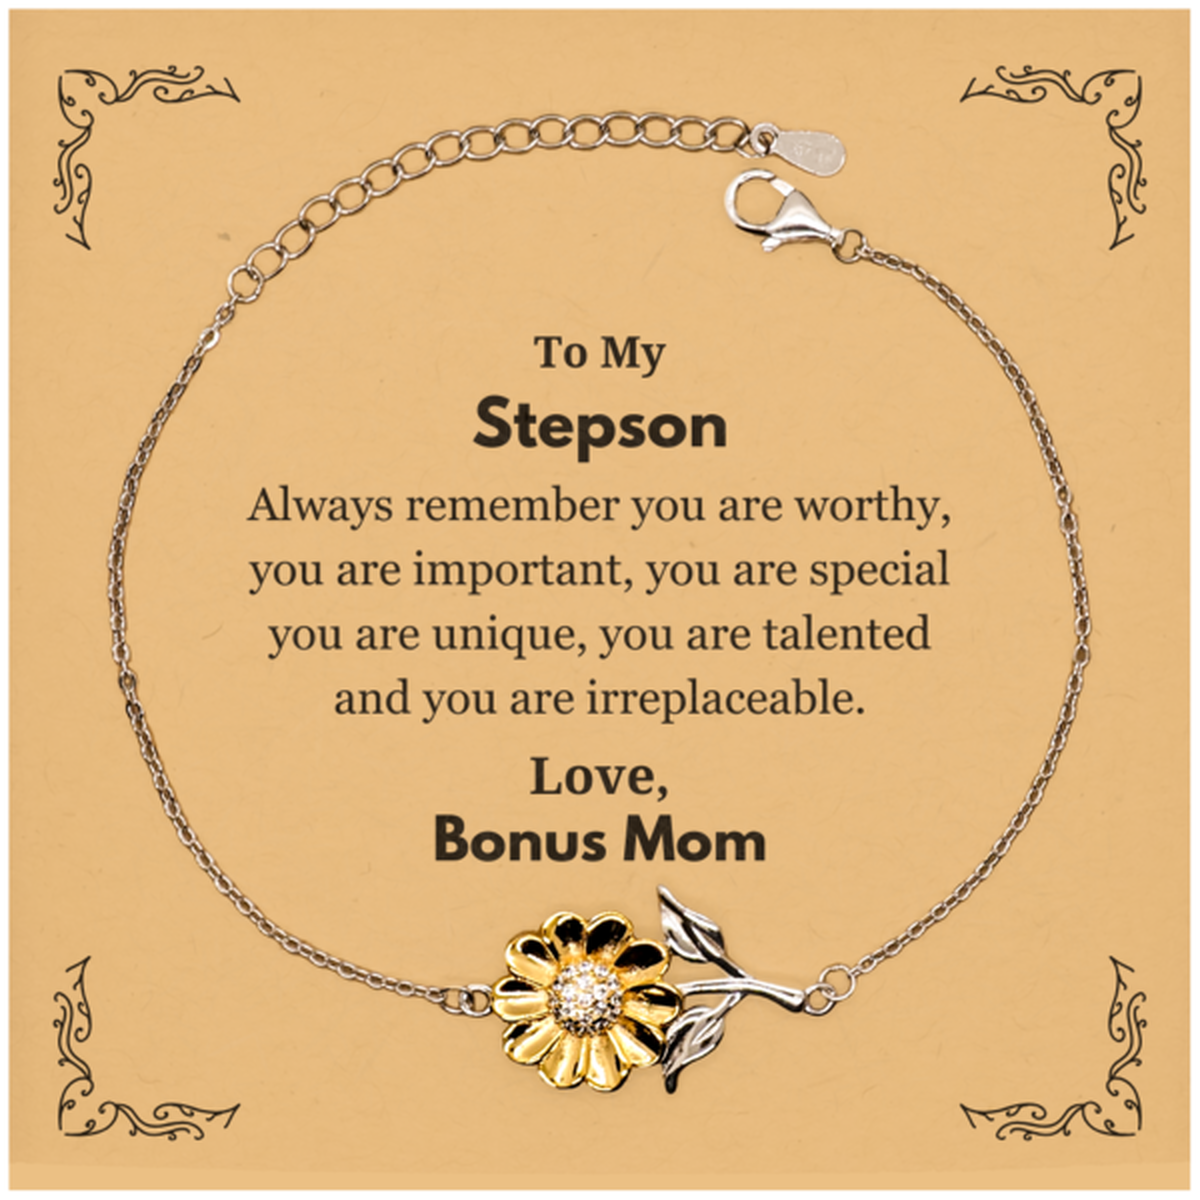 Stepson Birthday Gifts from Bonus Mom, Inspirational Sunflower Bracelet for Stepson Christmas Graduation Gifts for Stepson Always remember you are worthy, you are important. Love, Bonus Mom